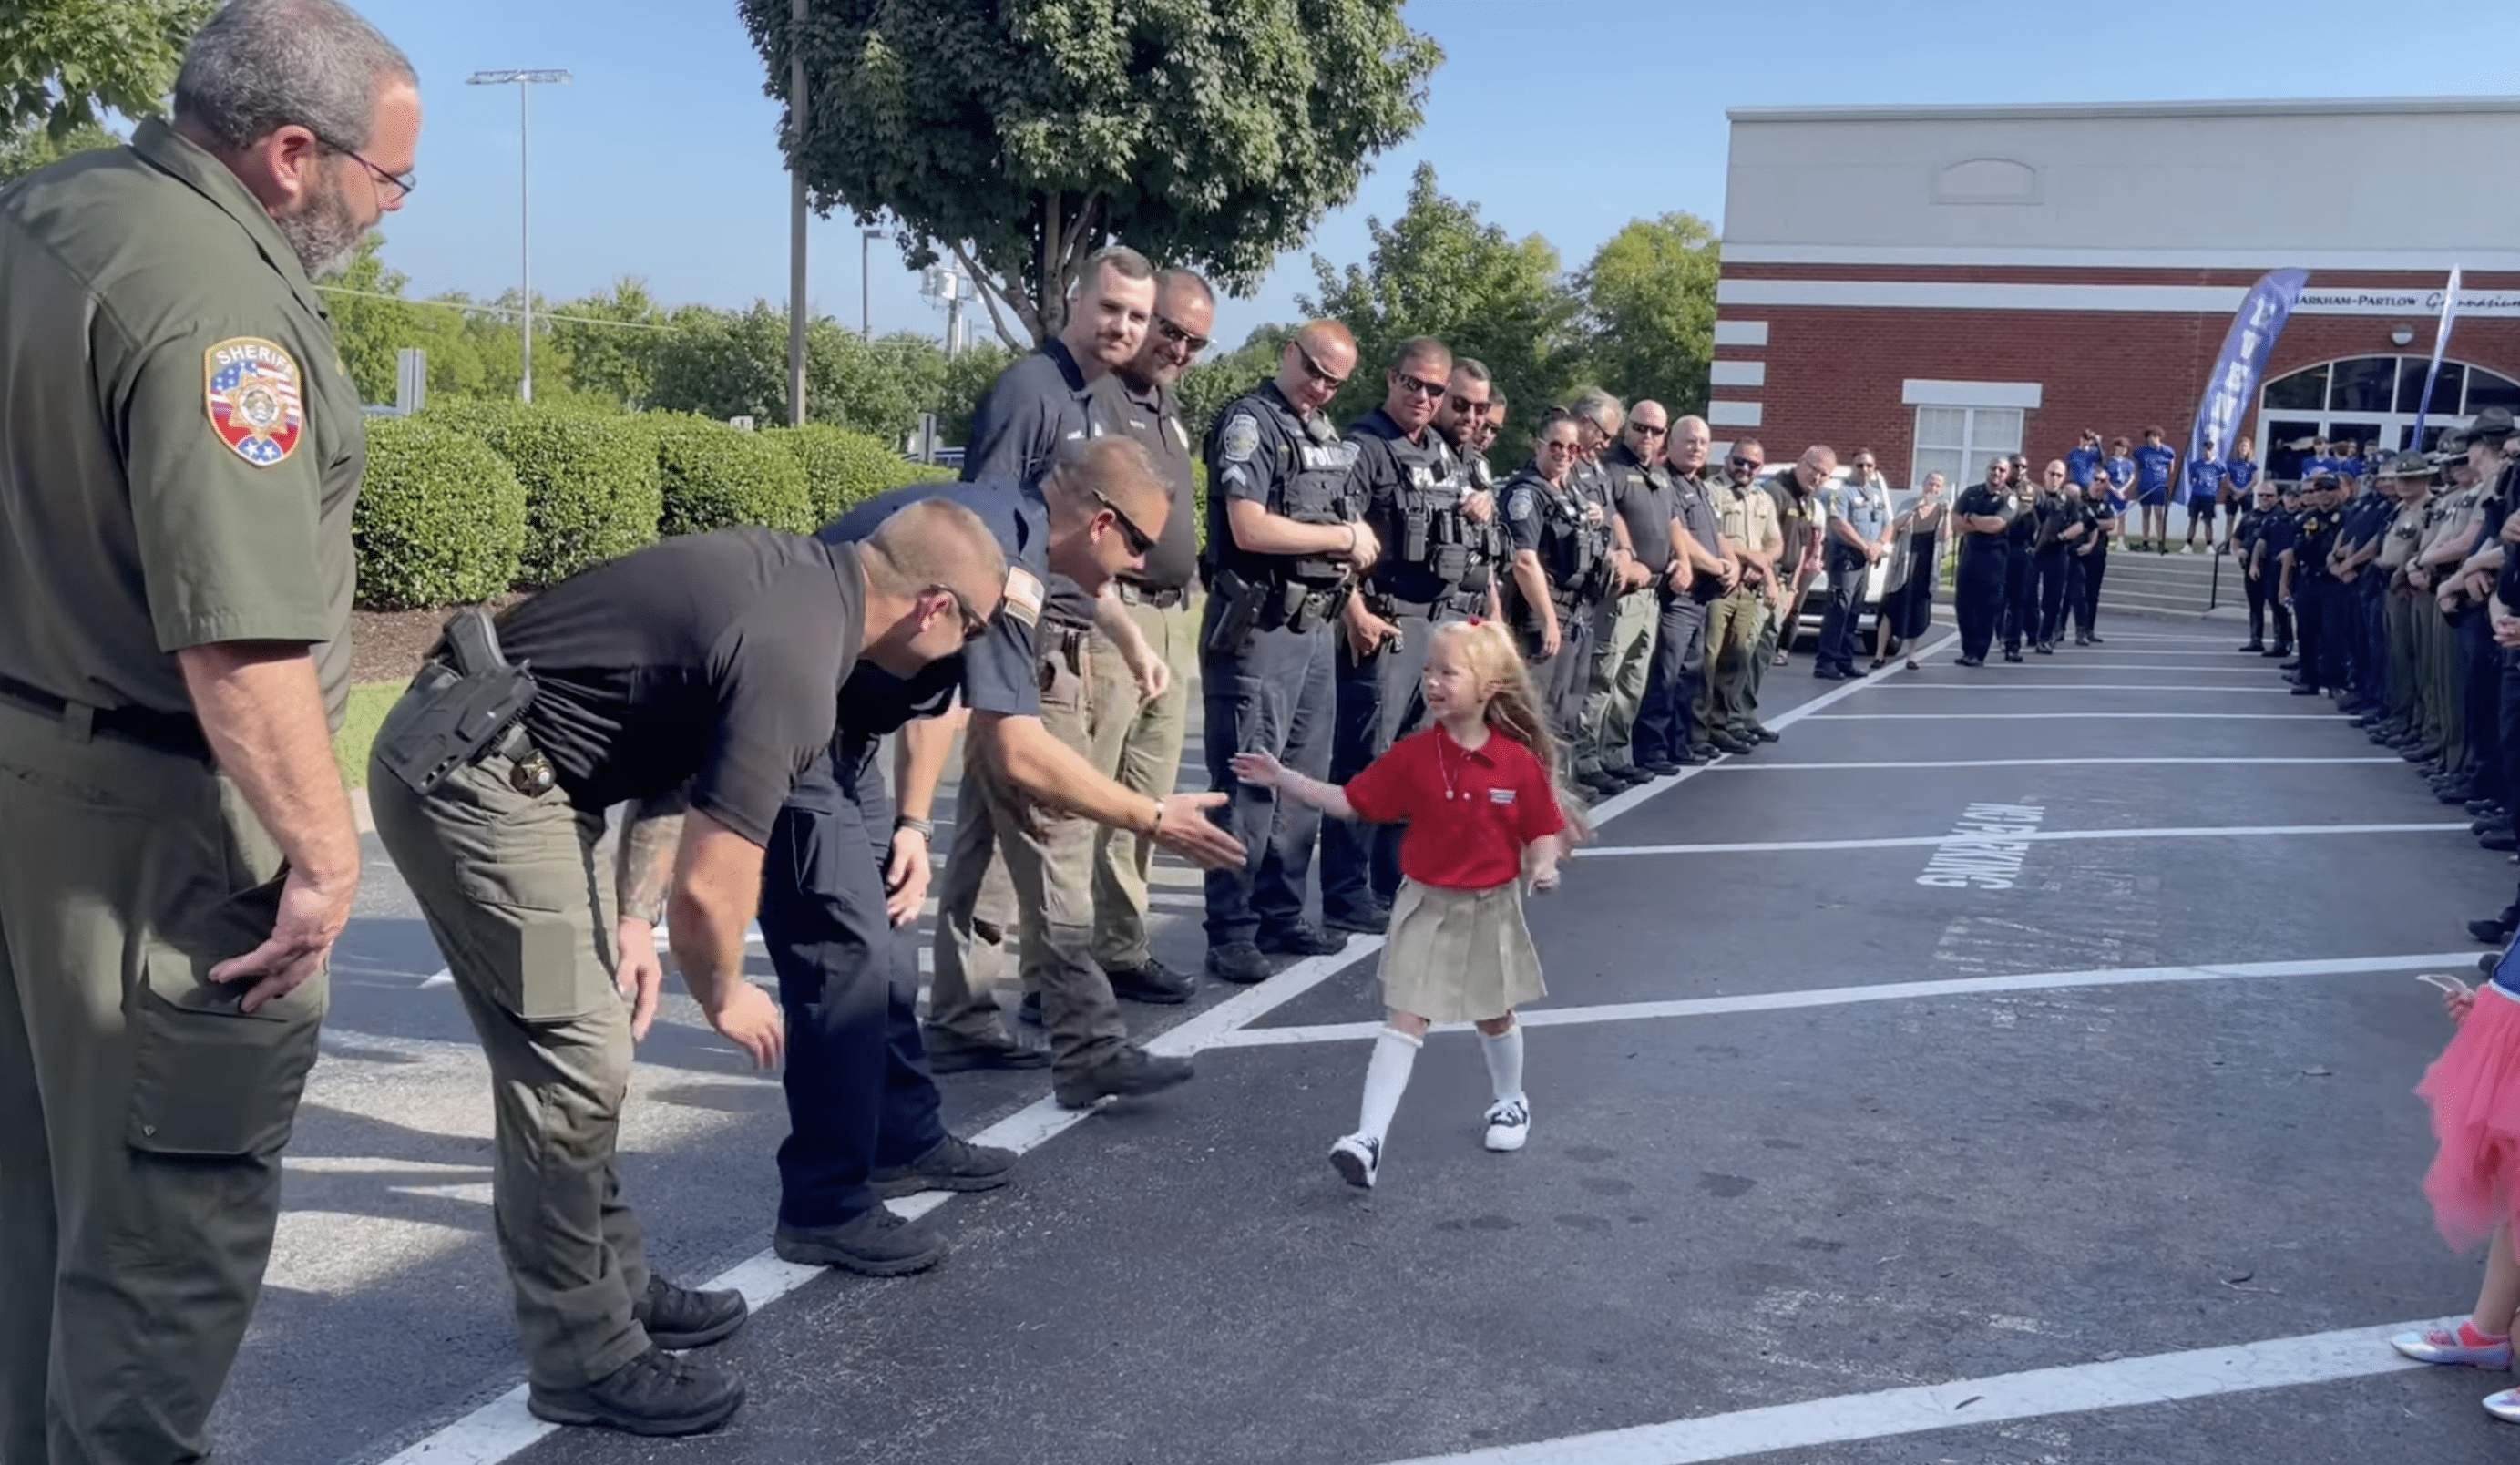 Anna Stolinsky giving the cops a high five as she walked down the line. | Source: Facebook.com/La Vergne Police Department